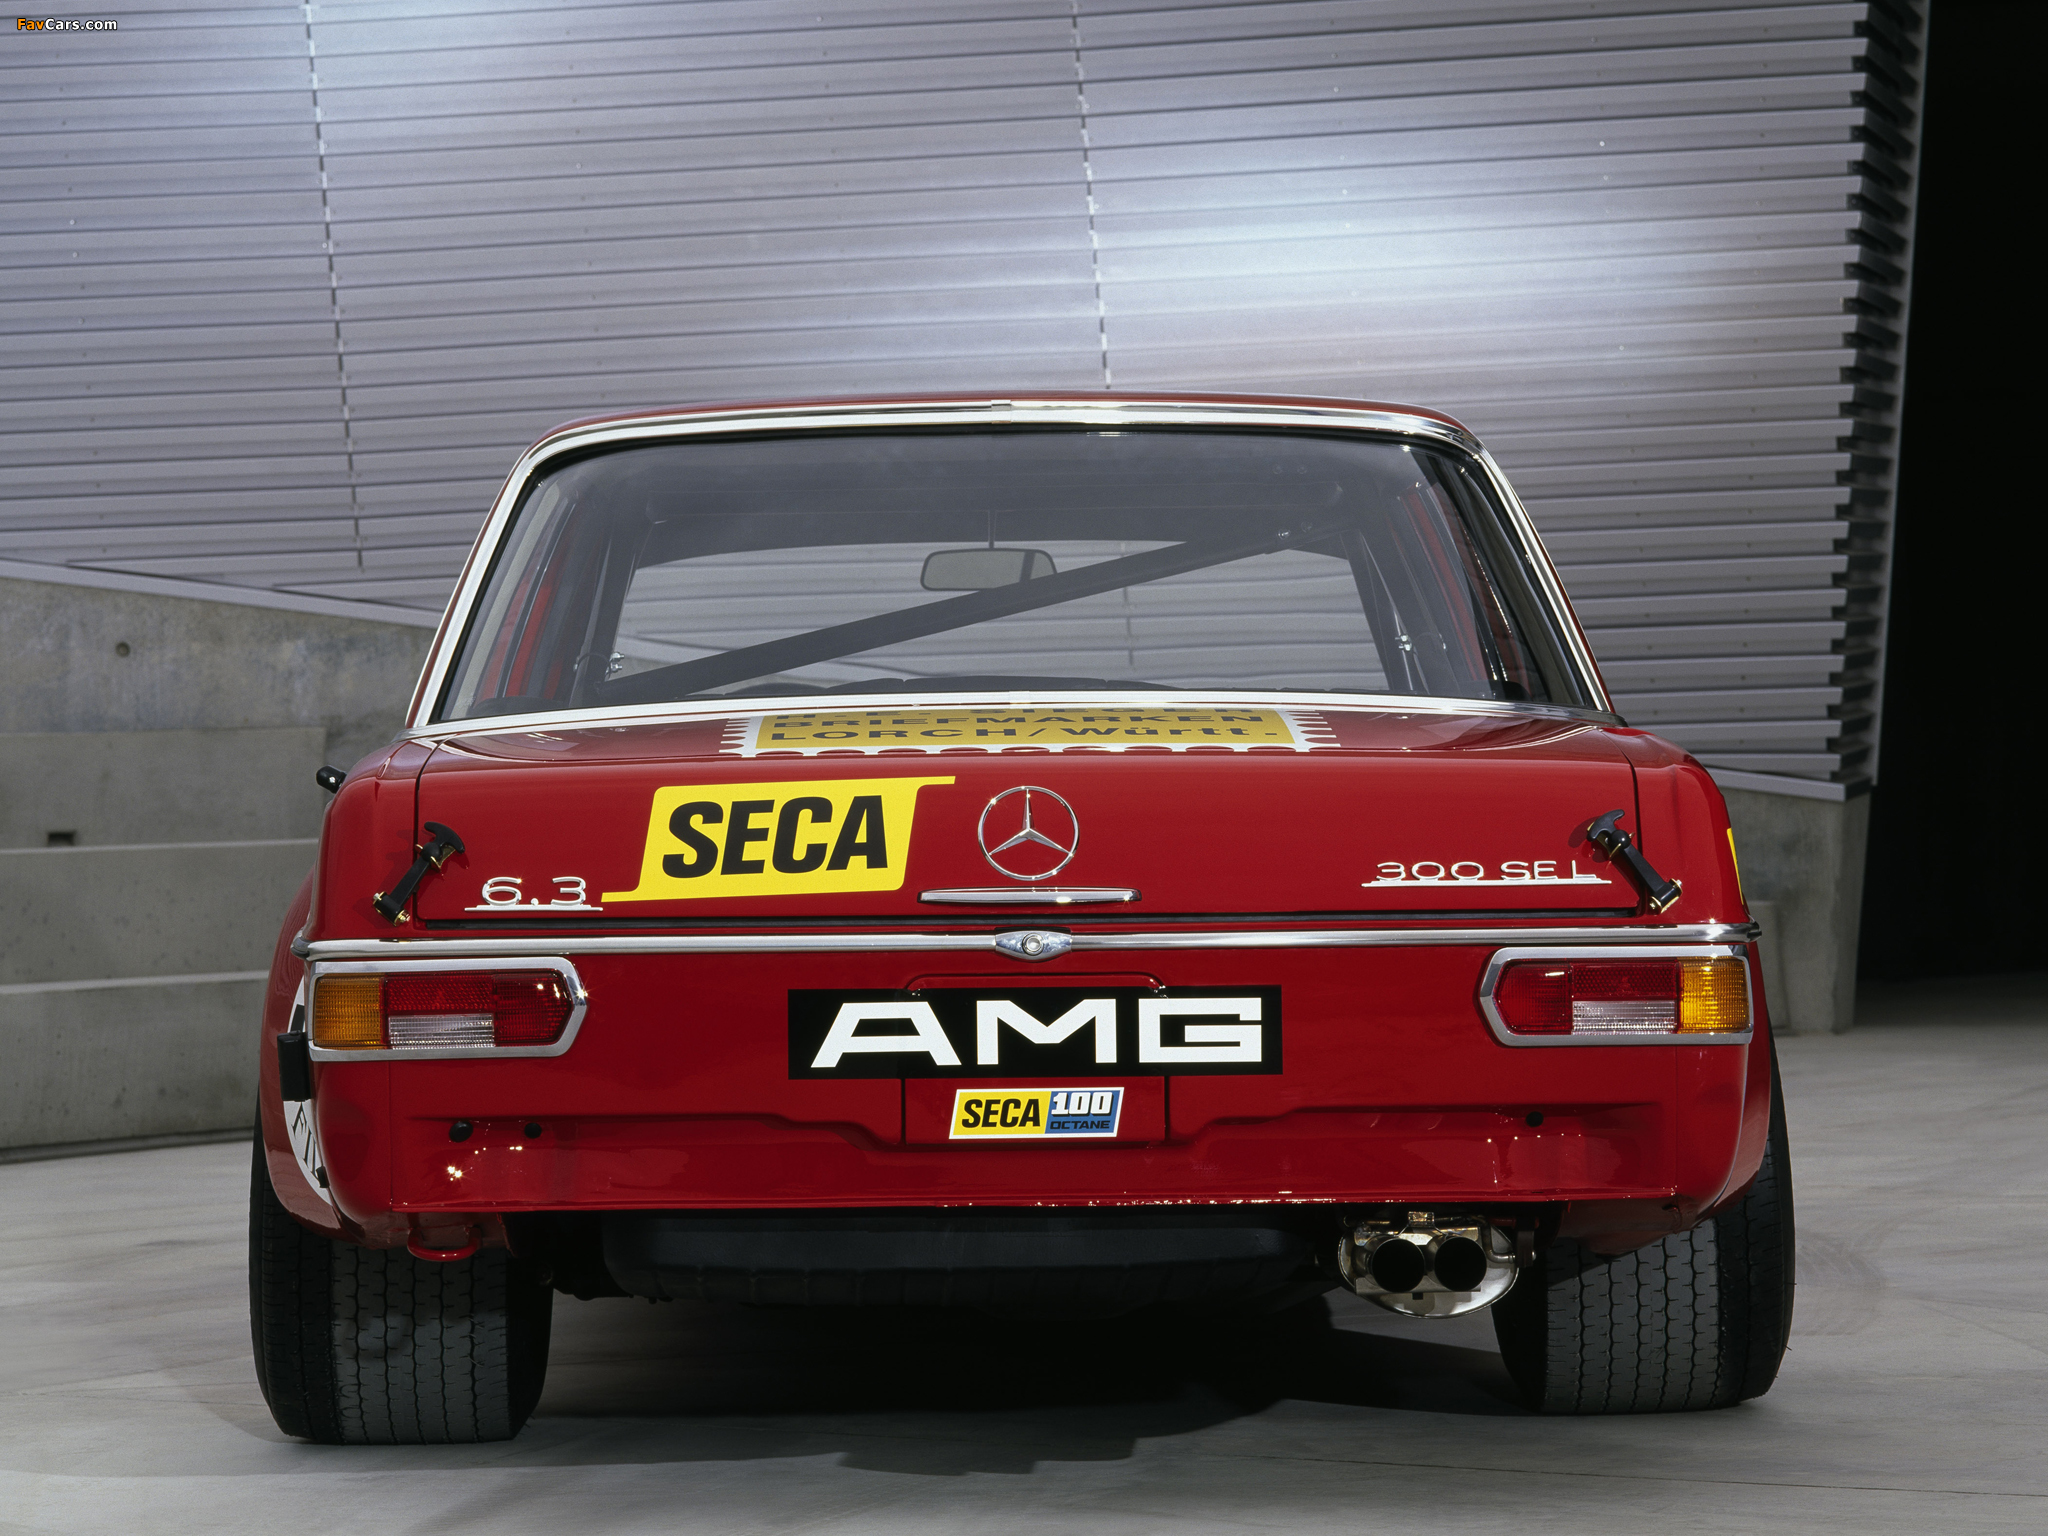 AMG 300SEL 6.3 Race Car (W109) 1971 pictures (2048 x 1536)